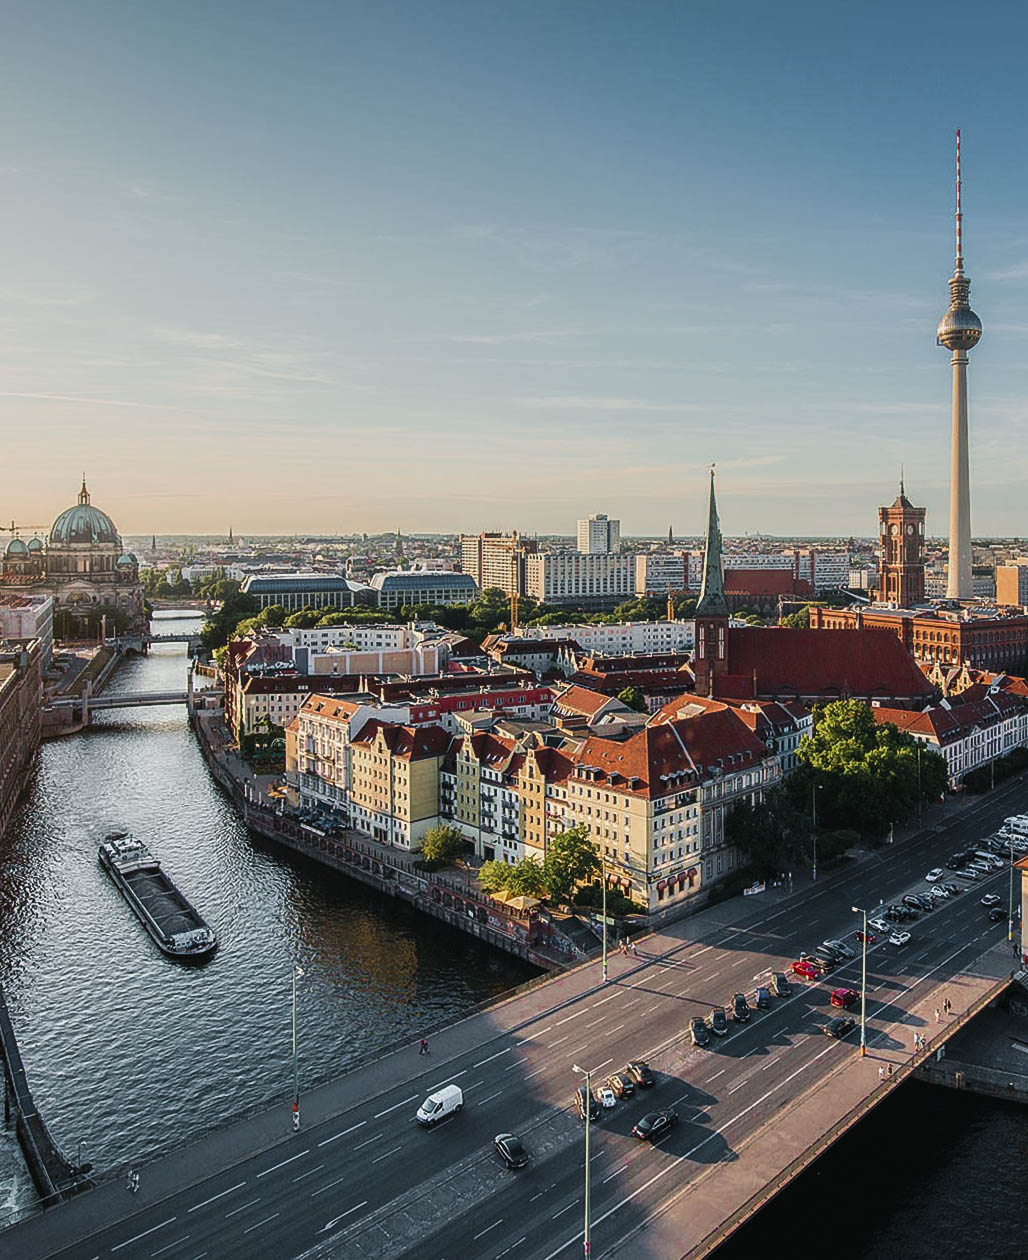 The city of Berlin viewed from above.